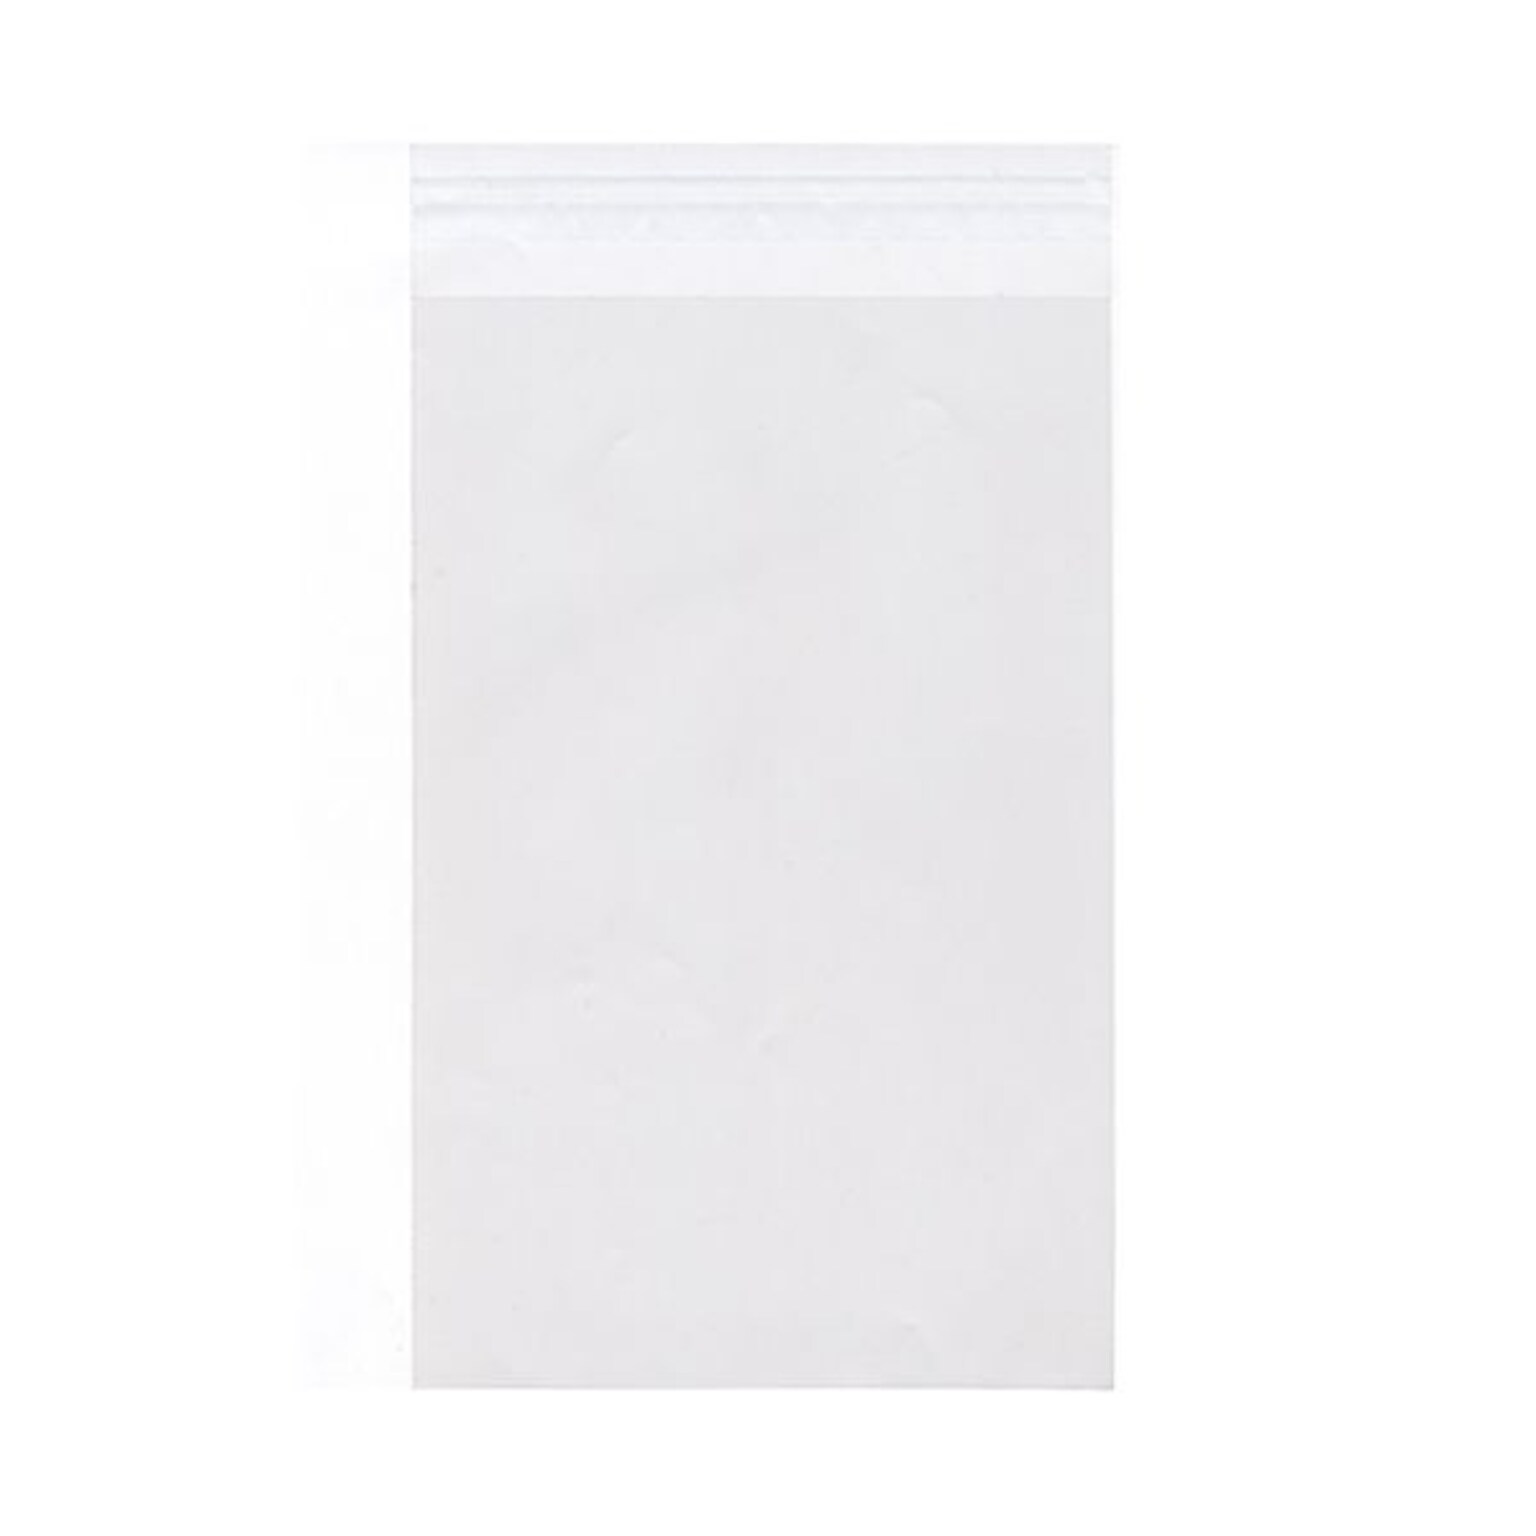 JAM Paper Cello Sleeves with Peel & Seal Closure, 3.6875 x 2.375, Clear, 100/Pack (BUSCARDCELLO)